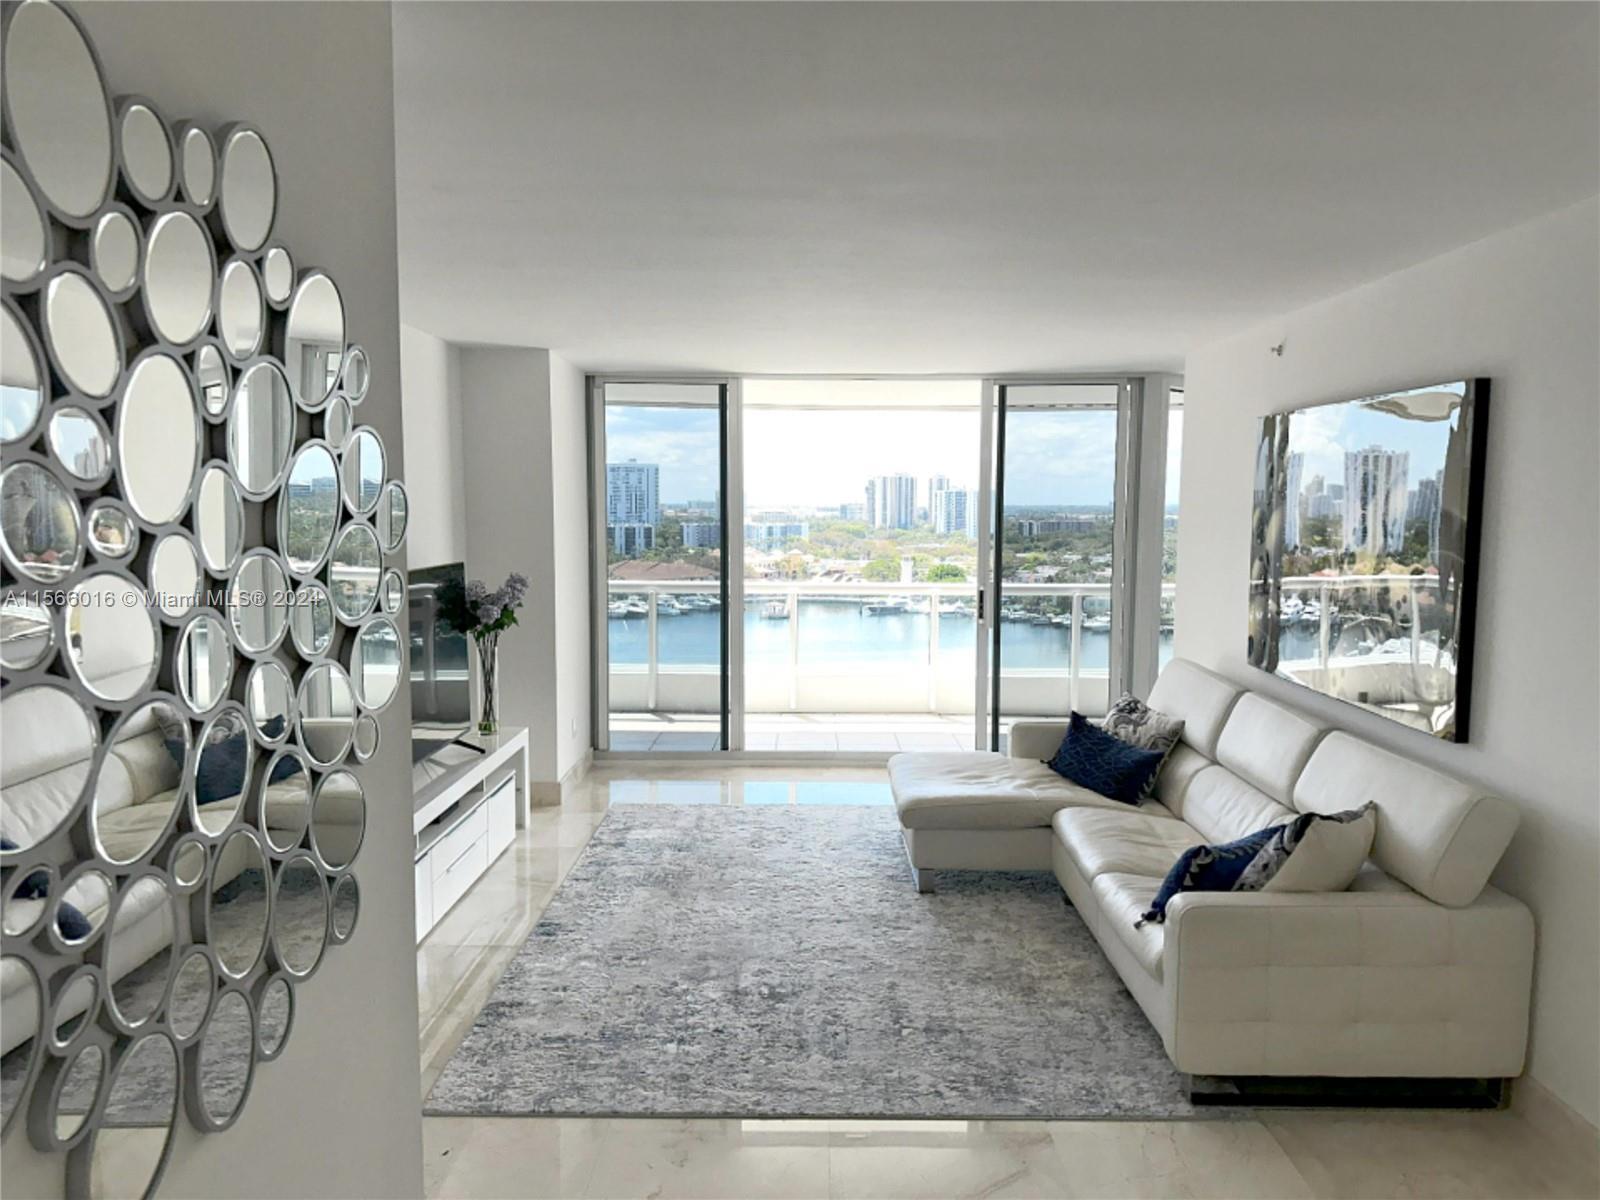 Gorgeous 2 bedroom 2 bath luxury condo with unobstructed panoramic views of the WATER, Marina and Ci